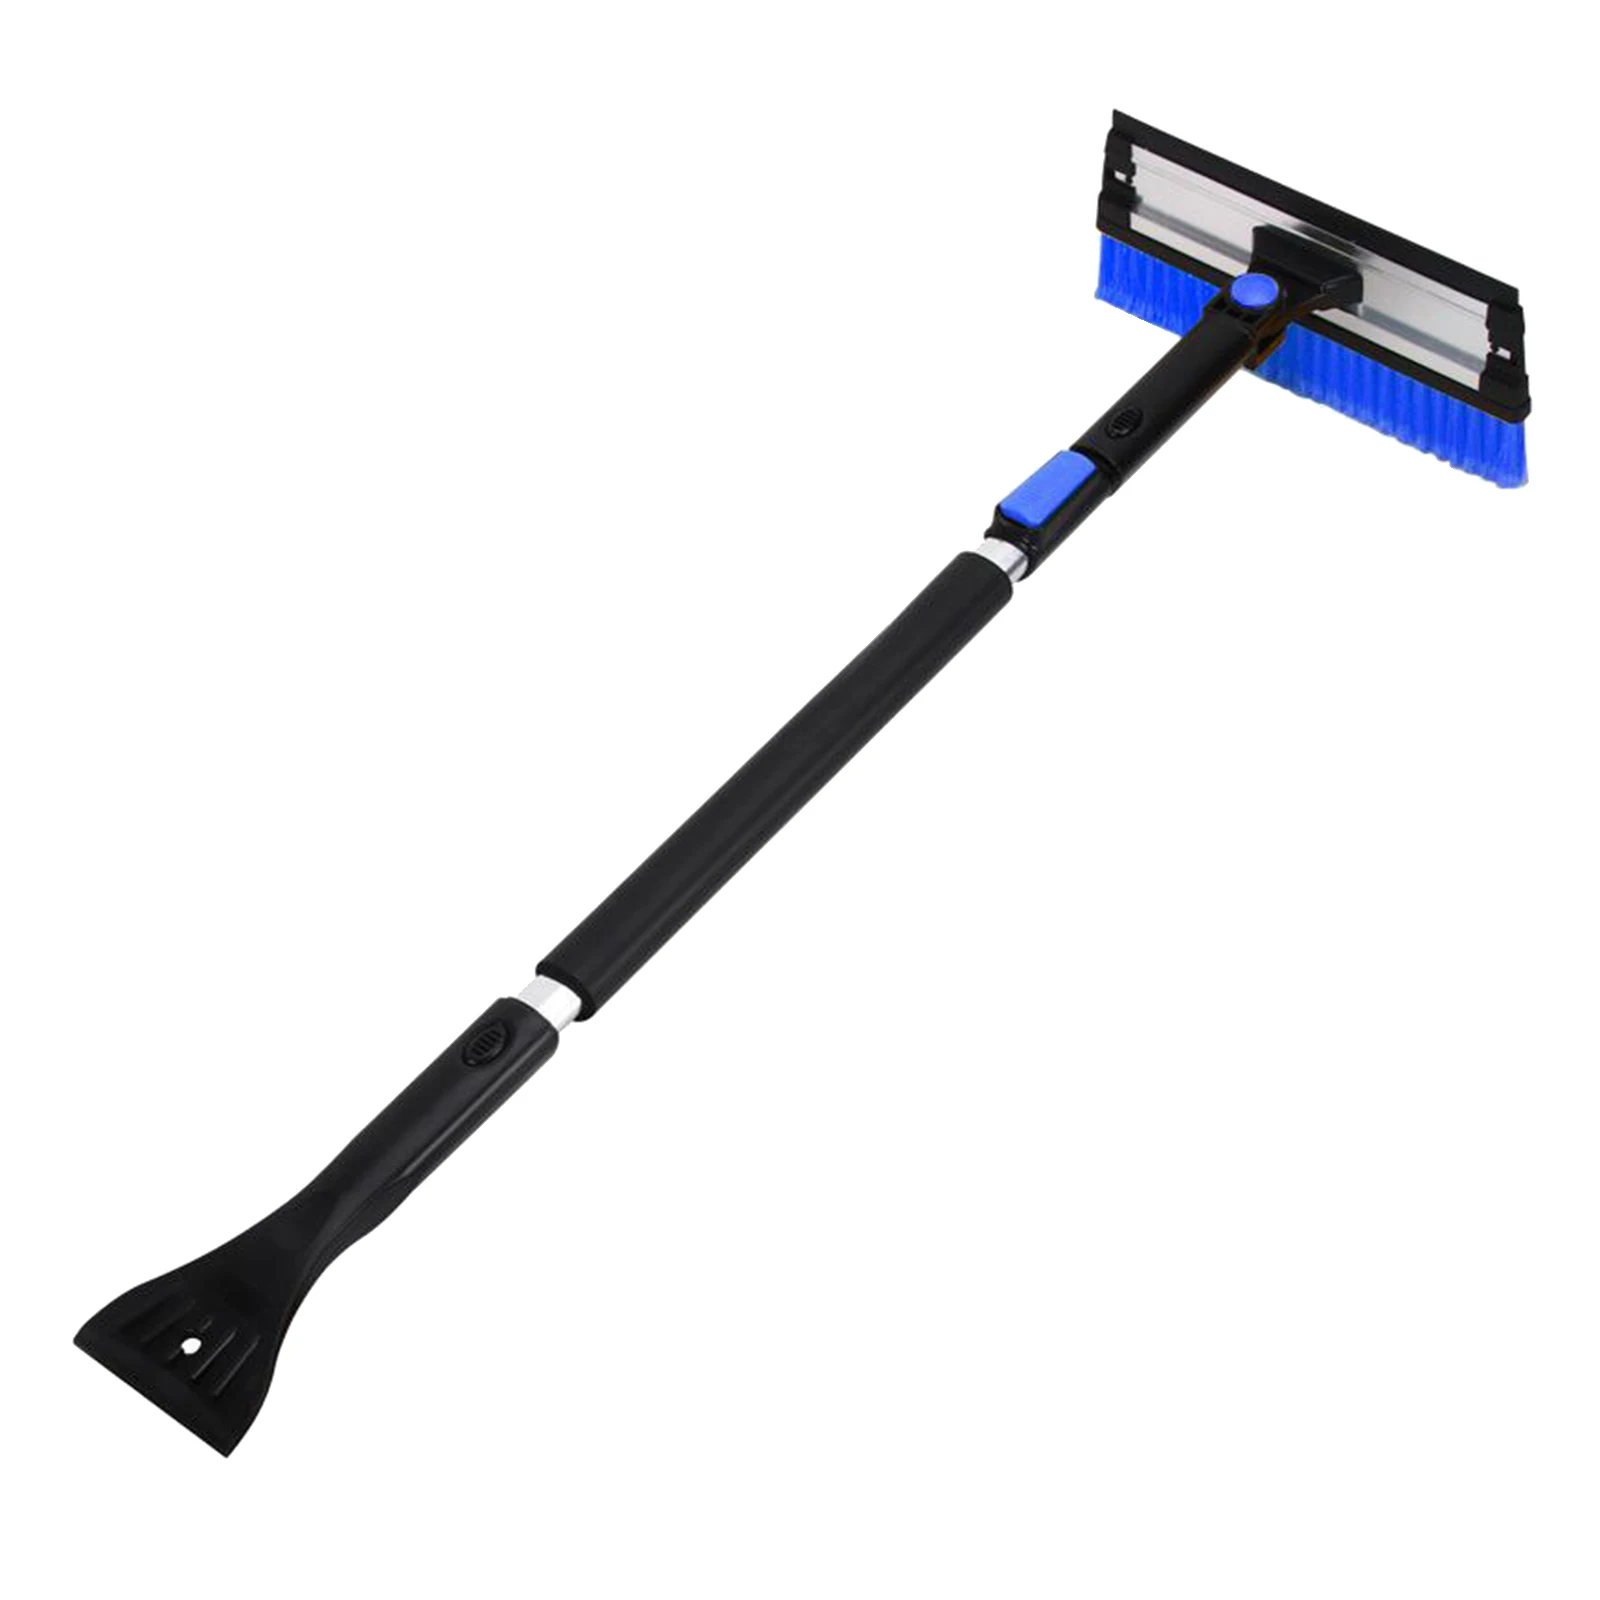 

Extendable Snow Shovel Ice Scraper Snow Brush Snow Remover Cleaning For Car Auto SUV Frost Windshield Cleaner Winter Broom Tool